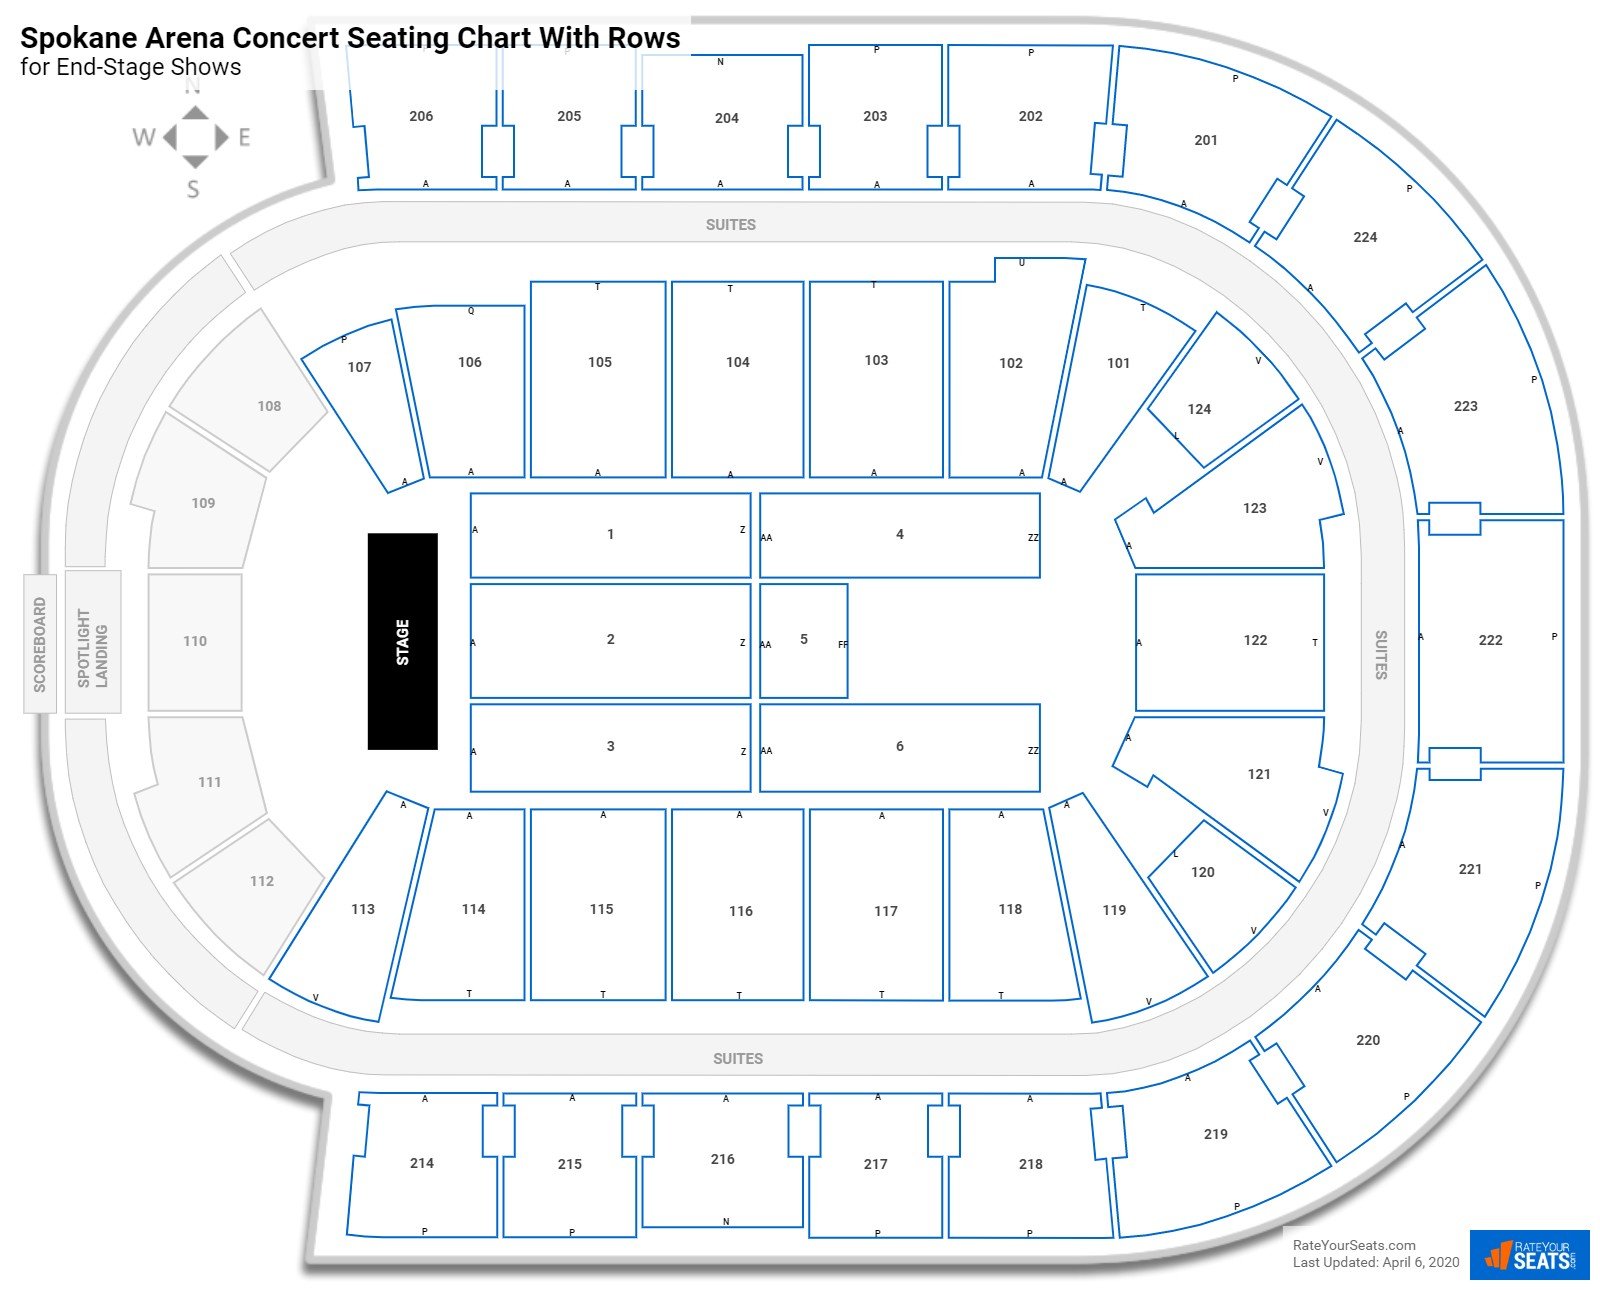 Spokane Arena seating chart with row numbers